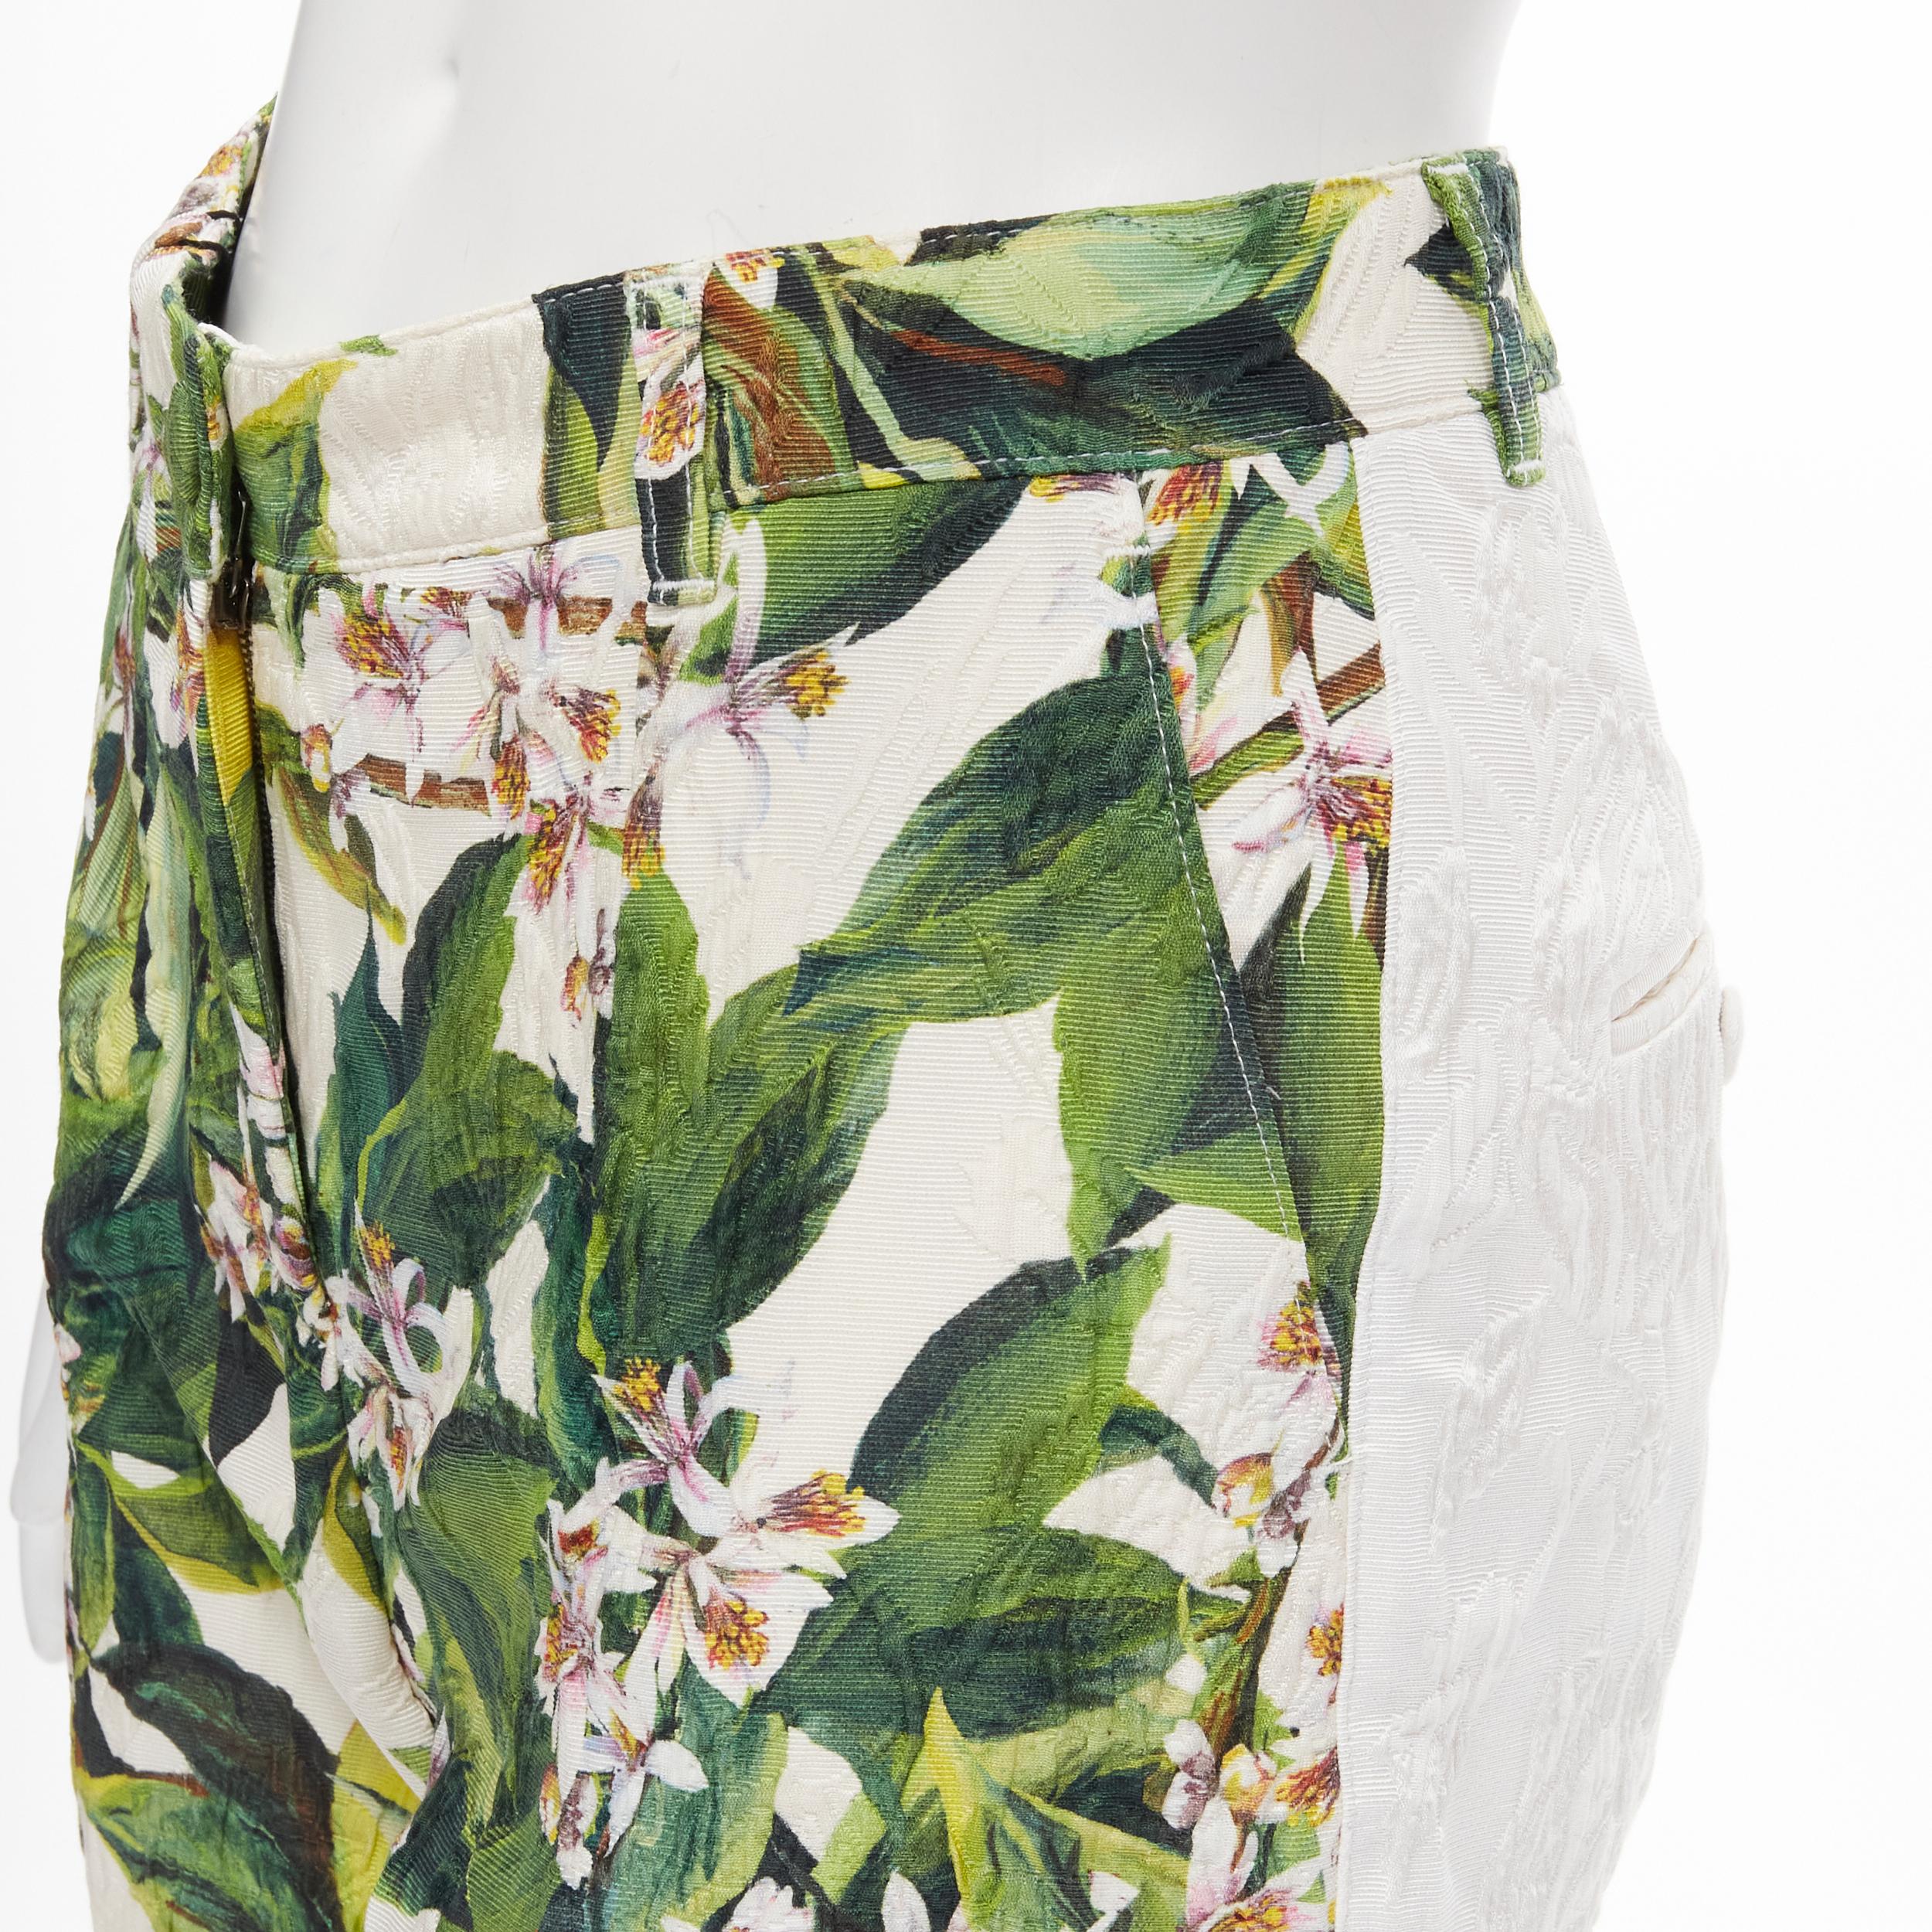 new DOLCE GABBANA green pink blossom floral jacquard cropped trousers IT36 XXS 
Reference: TGAS/B02061 
Brand: Dolce Gabbana 
Material: Cotton 
Color: Green 
Pattern: Floral 
Closure: Zip fly 
Extra Detail: 4-pocket design. Zip fly closure. 
Made